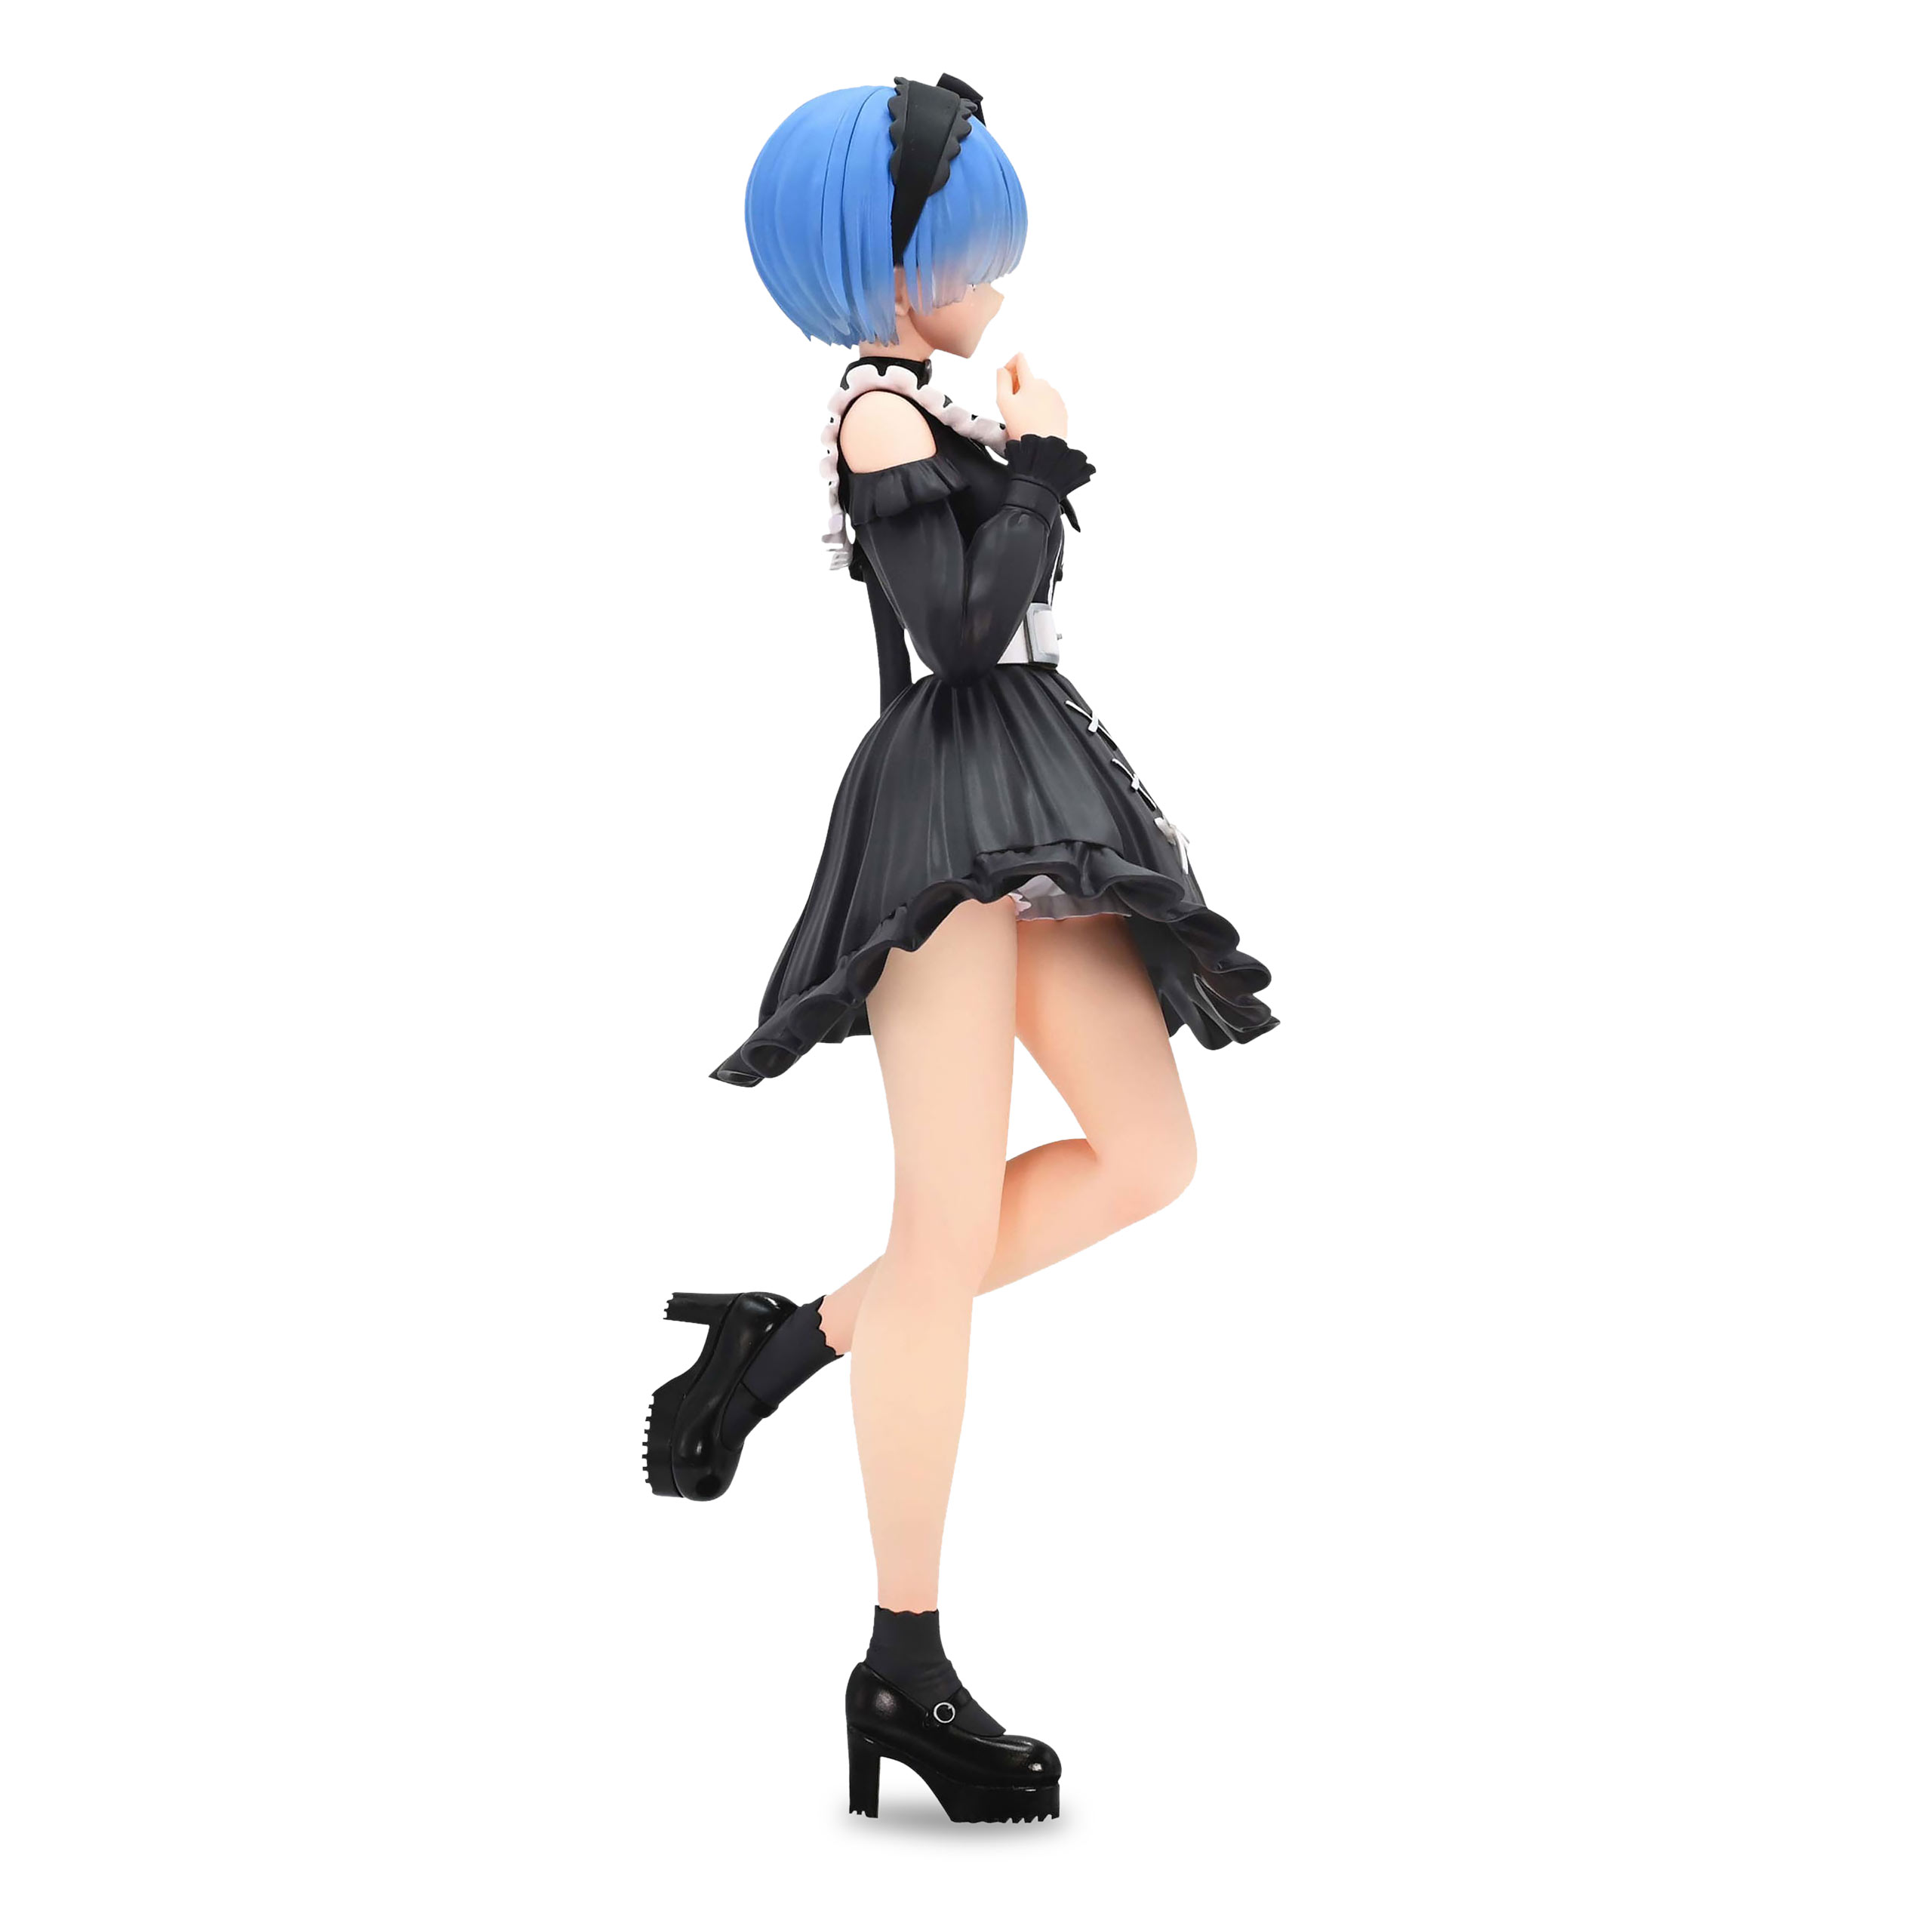 Re:Zero - Rem Girly Outfit Black Figure